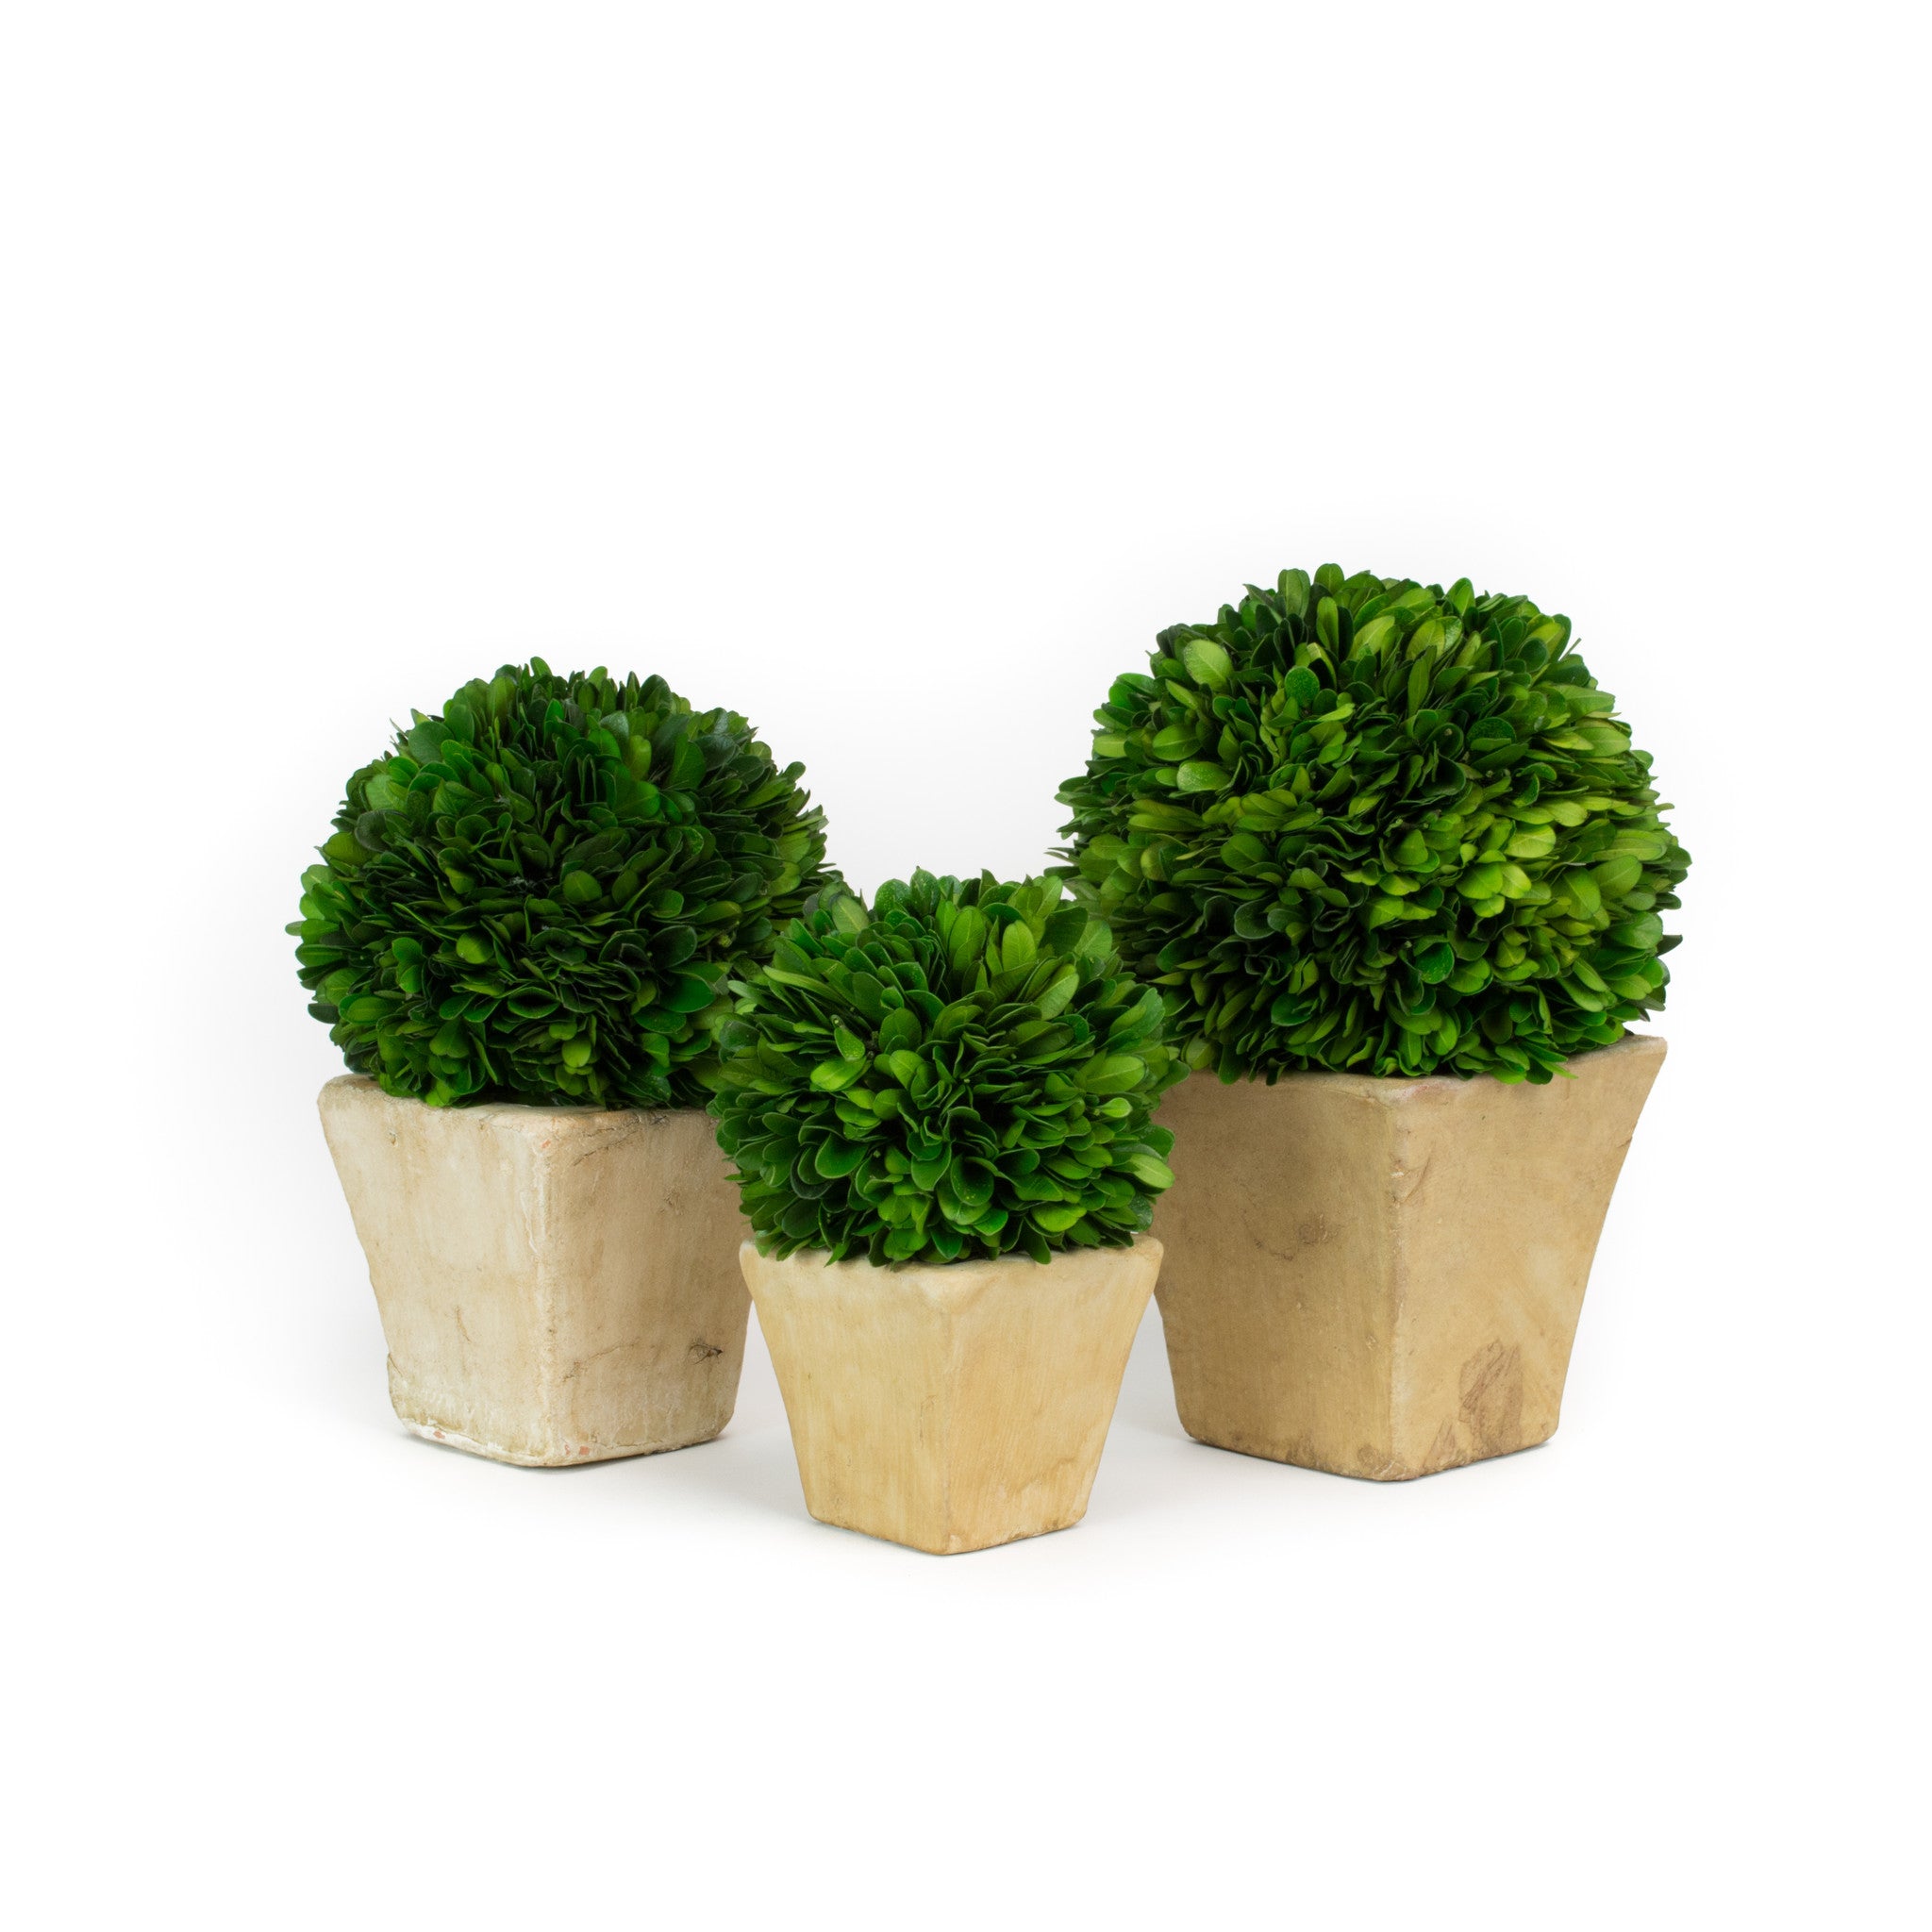 Preserved Boxwood Balls in Pot, Set of 3